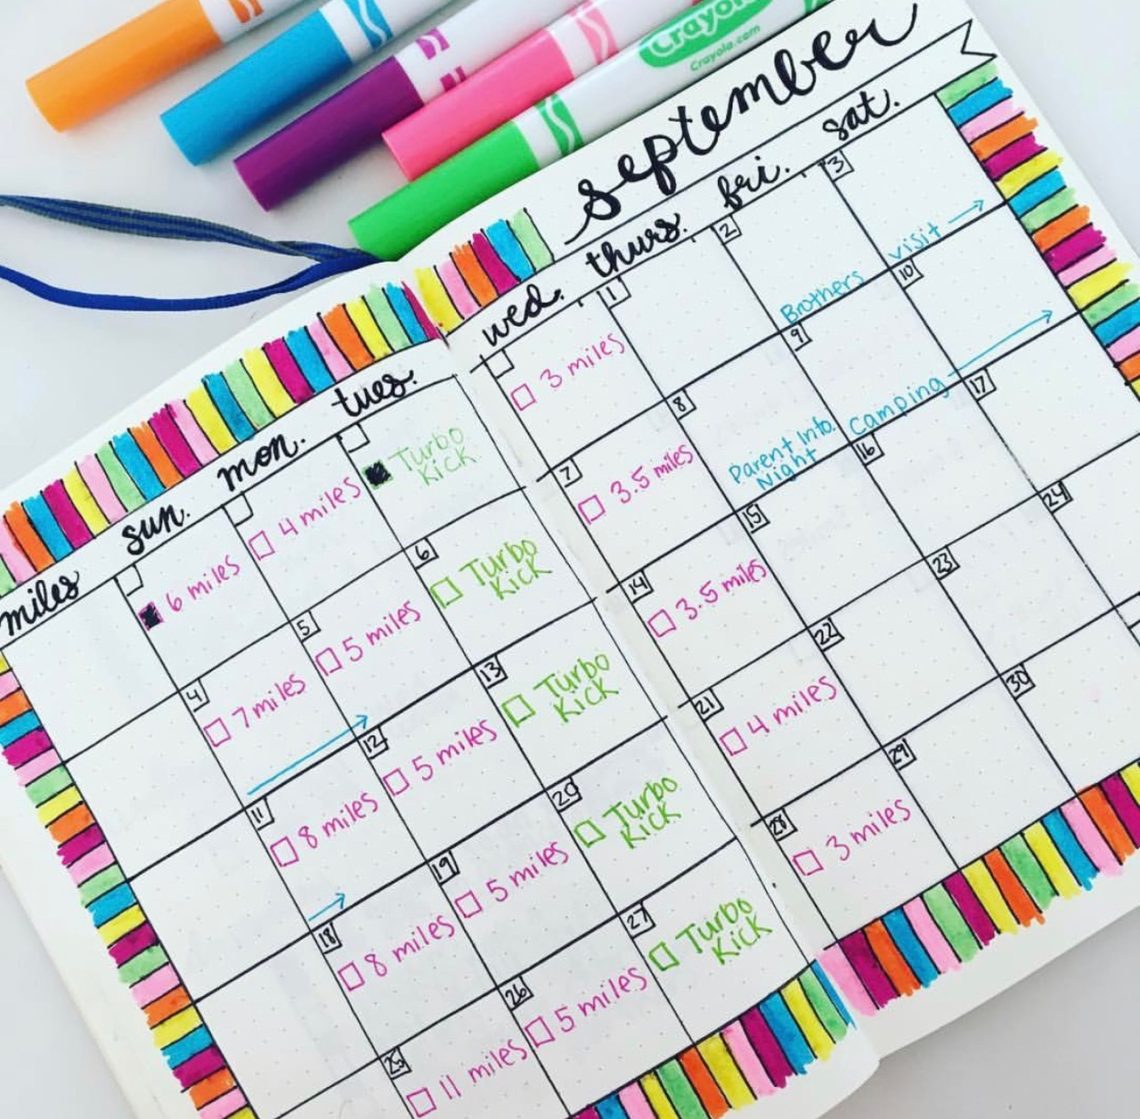 Monthly workout schedule in my bullet journal. I share over ten different ways that you can use a bullet journal to track health and fitness in this post! #bujo #bulletjournal